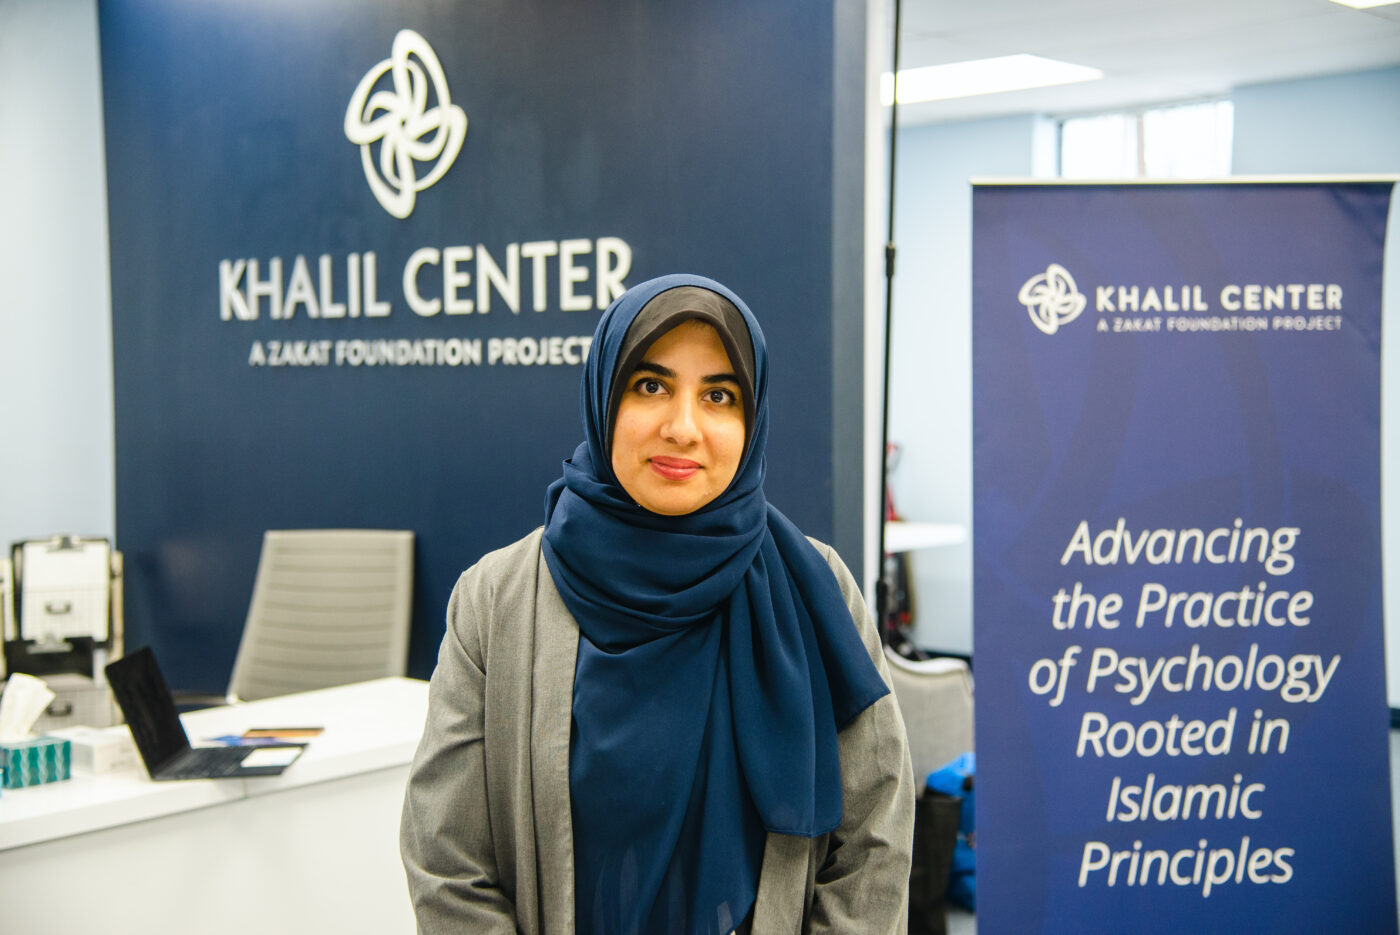 Kashmala Qasim, researcher and workshop coordinator at the Khalil Center, works with her team to address mental health stigma in the Muslim community.